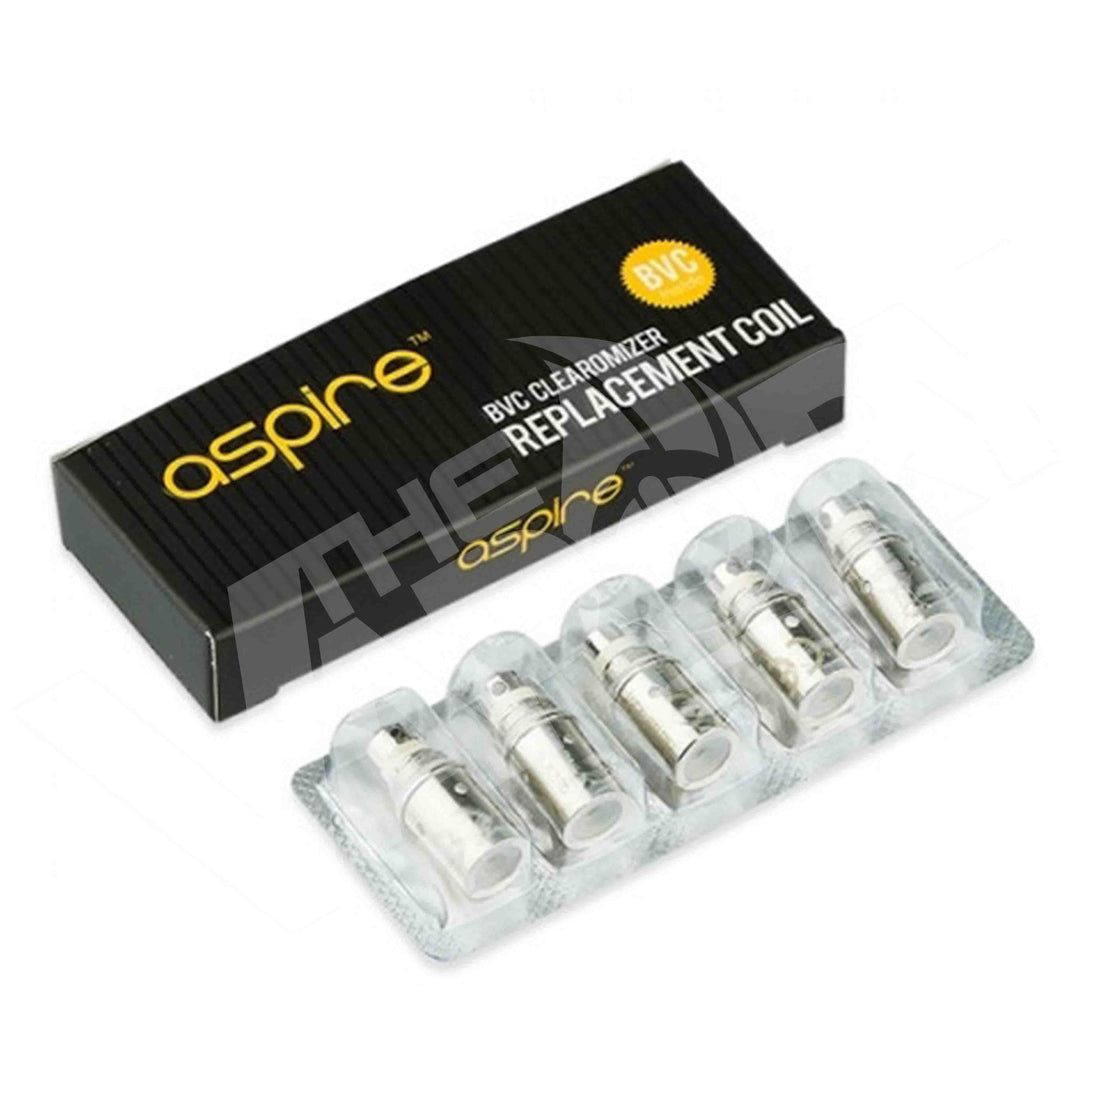 ASPIRE SPRYTE OR K1 REPLACEMENT COILS REPLACEMENT COILS Pacific Smoke 